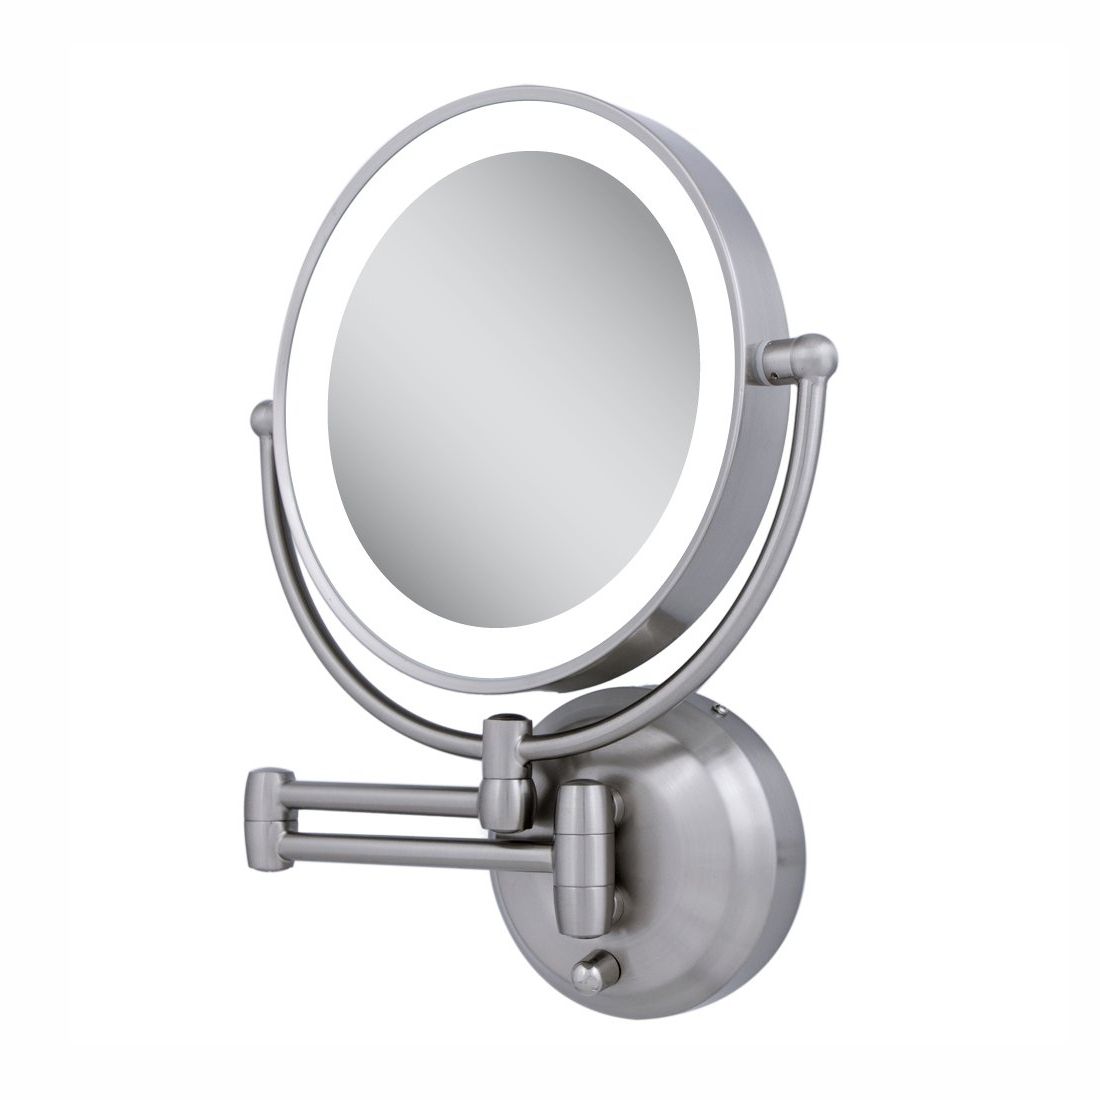 Wall Mounted Extendable Lighted Mirror • Bathroom Mirrors And Wall Intended For 2019 Extendable Wall Mirrors (View 10 of 20)